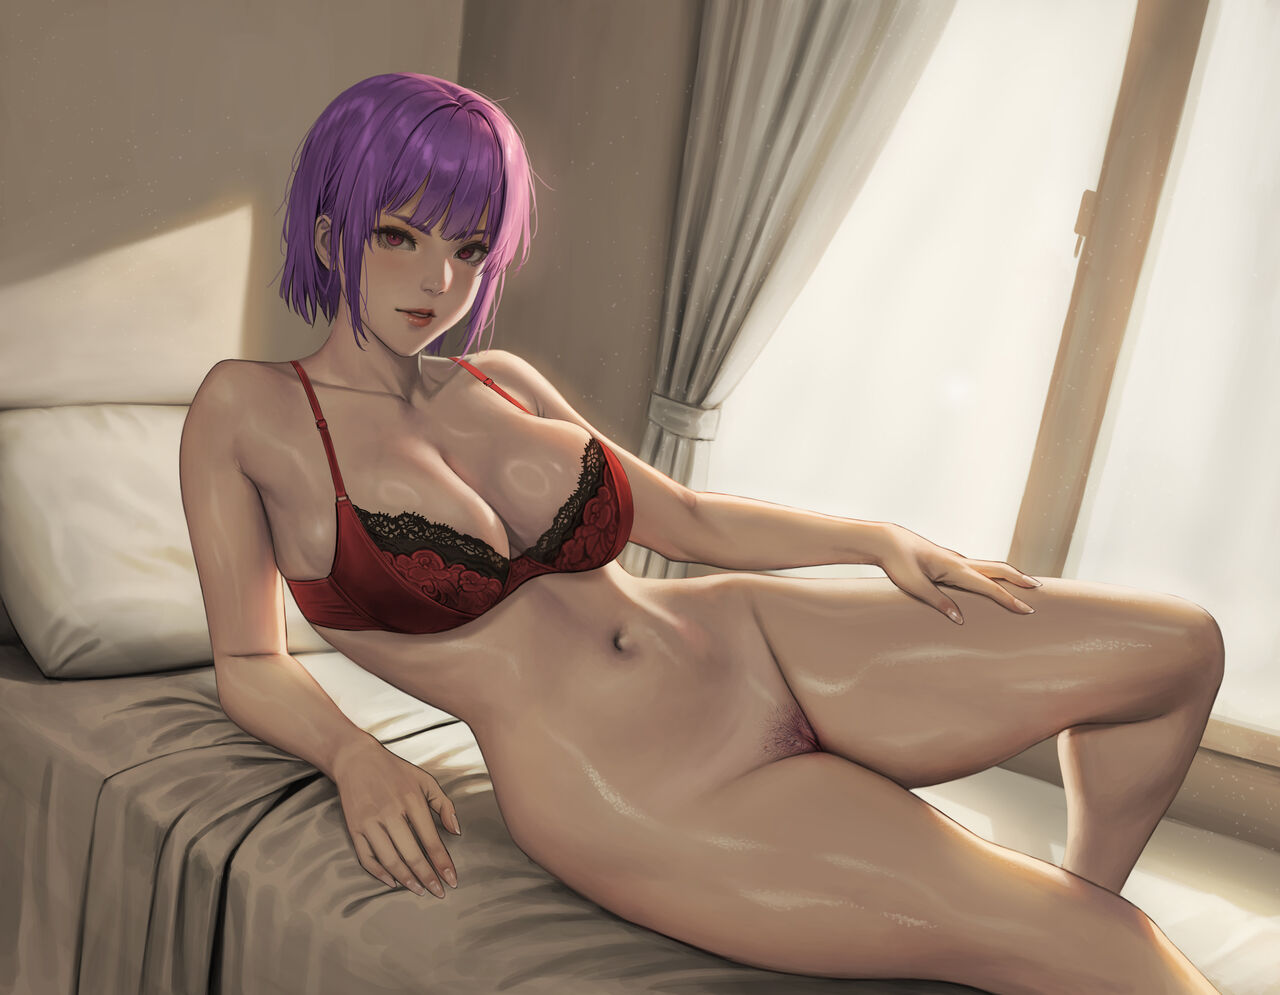 1girl alluring ayane ayane_(doa) big_breasts bra bra_only cleavage dead_or_alive dead_or_alive_2 dead_or_alive_3 dead_or_alive_4 dead_or_alive_5 dead_or_alive_6 dead_or_alive_xtreme dead_or_alive_xtreme_2 dead_or_alive_xtreme_3_fortune dead_or_alive_xtreme_beach_volleyball dead_or_alive_xtreme_venus_vacation high_res jeneral lingerie naked_from_the_waist_down pubic_hair purple_hair pussy short_hair tecmo underwear voluptuous